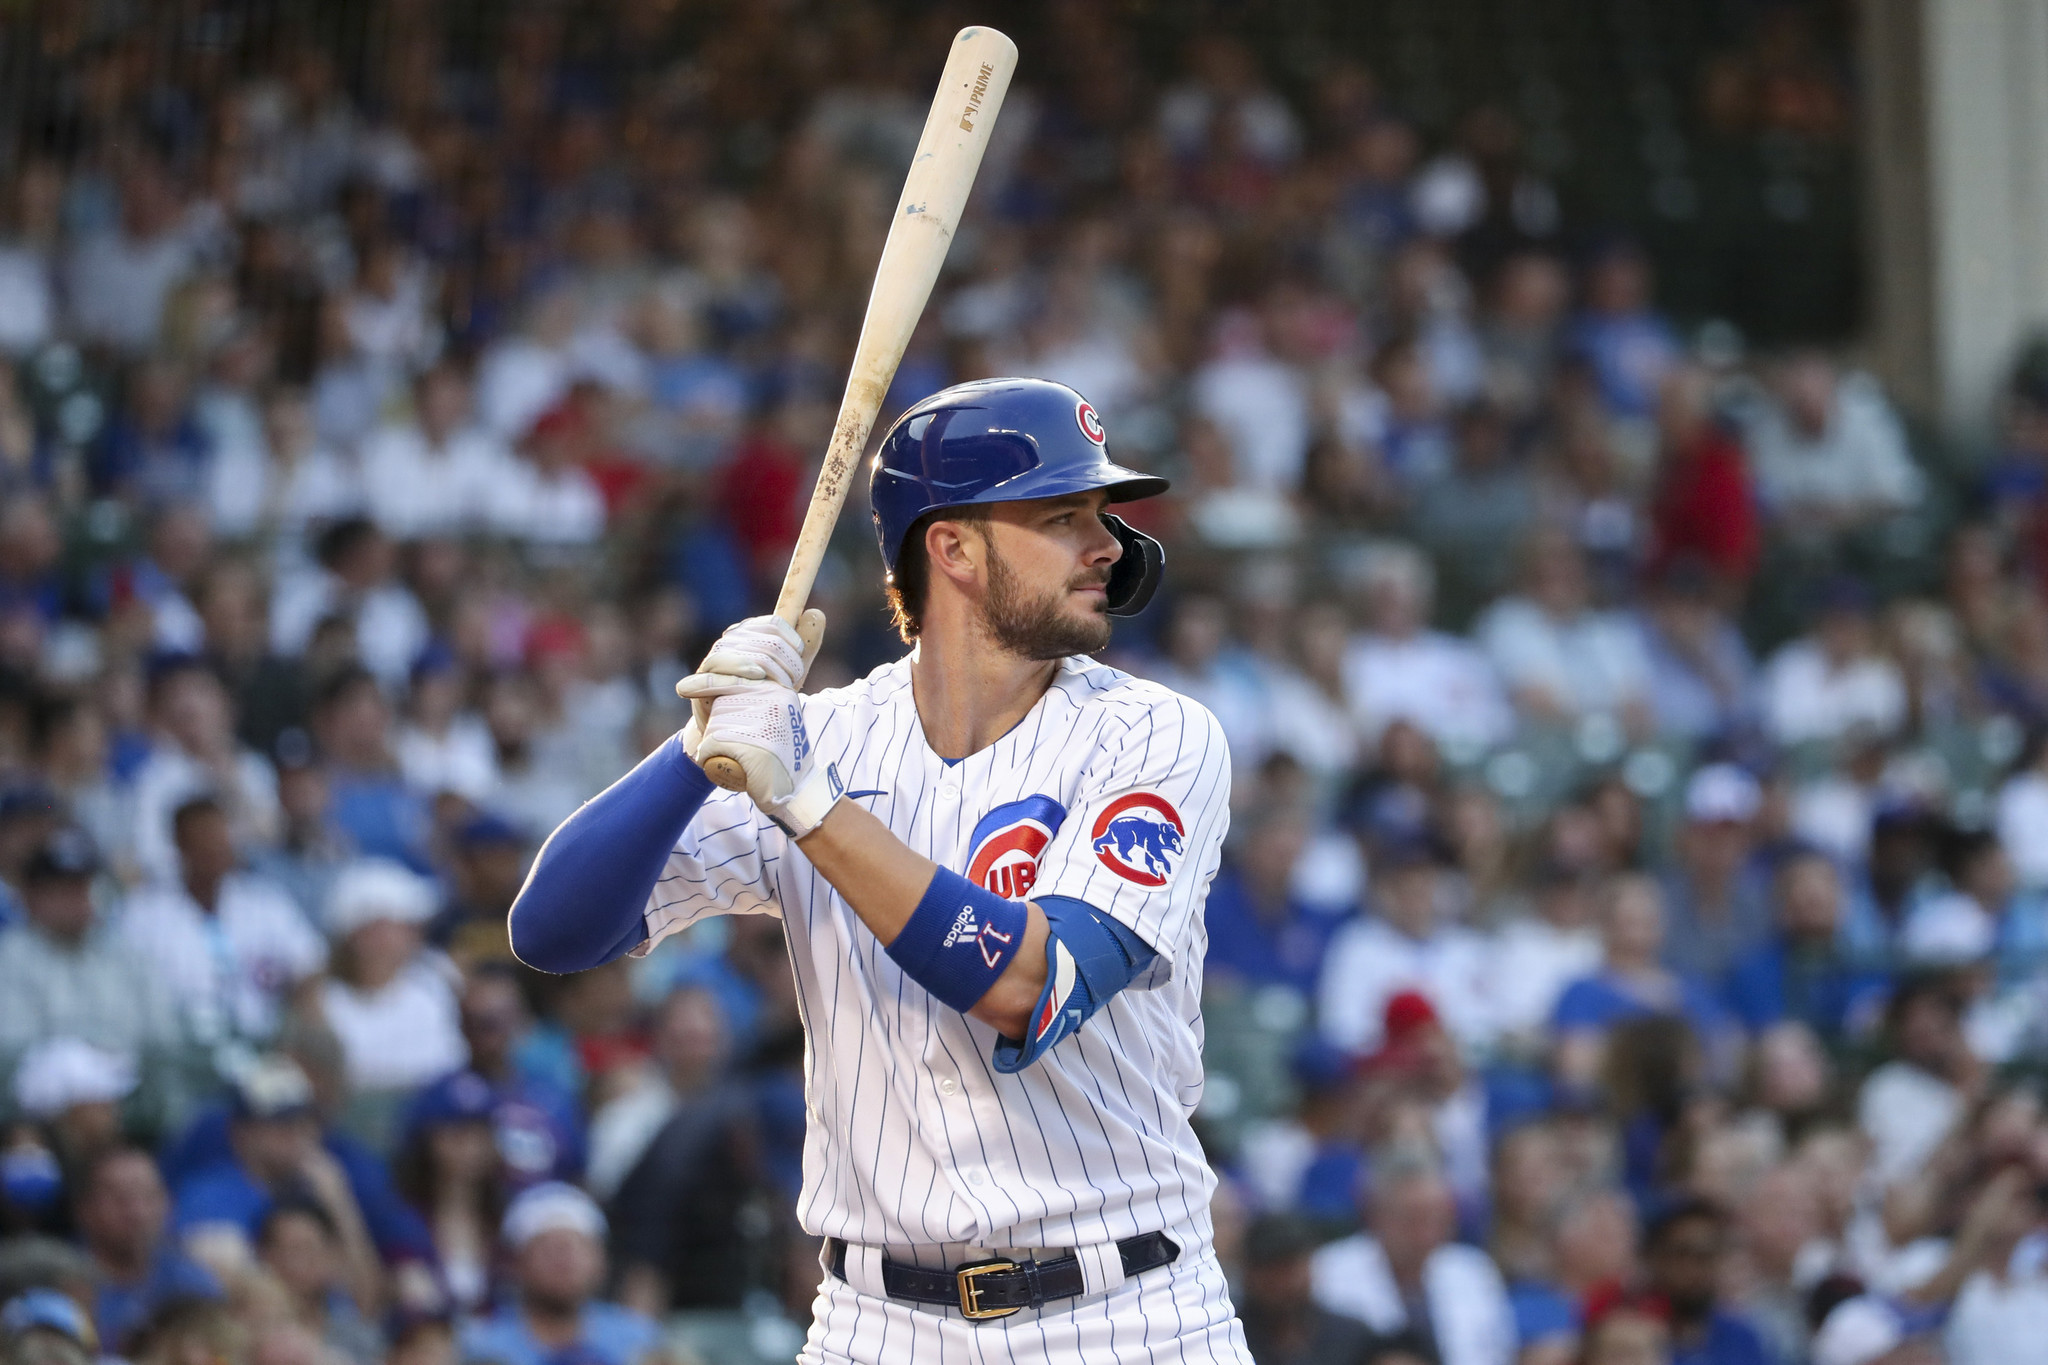 Kris Bryant? Anthony Rizzo? No consensus on Home Run Derby favorite